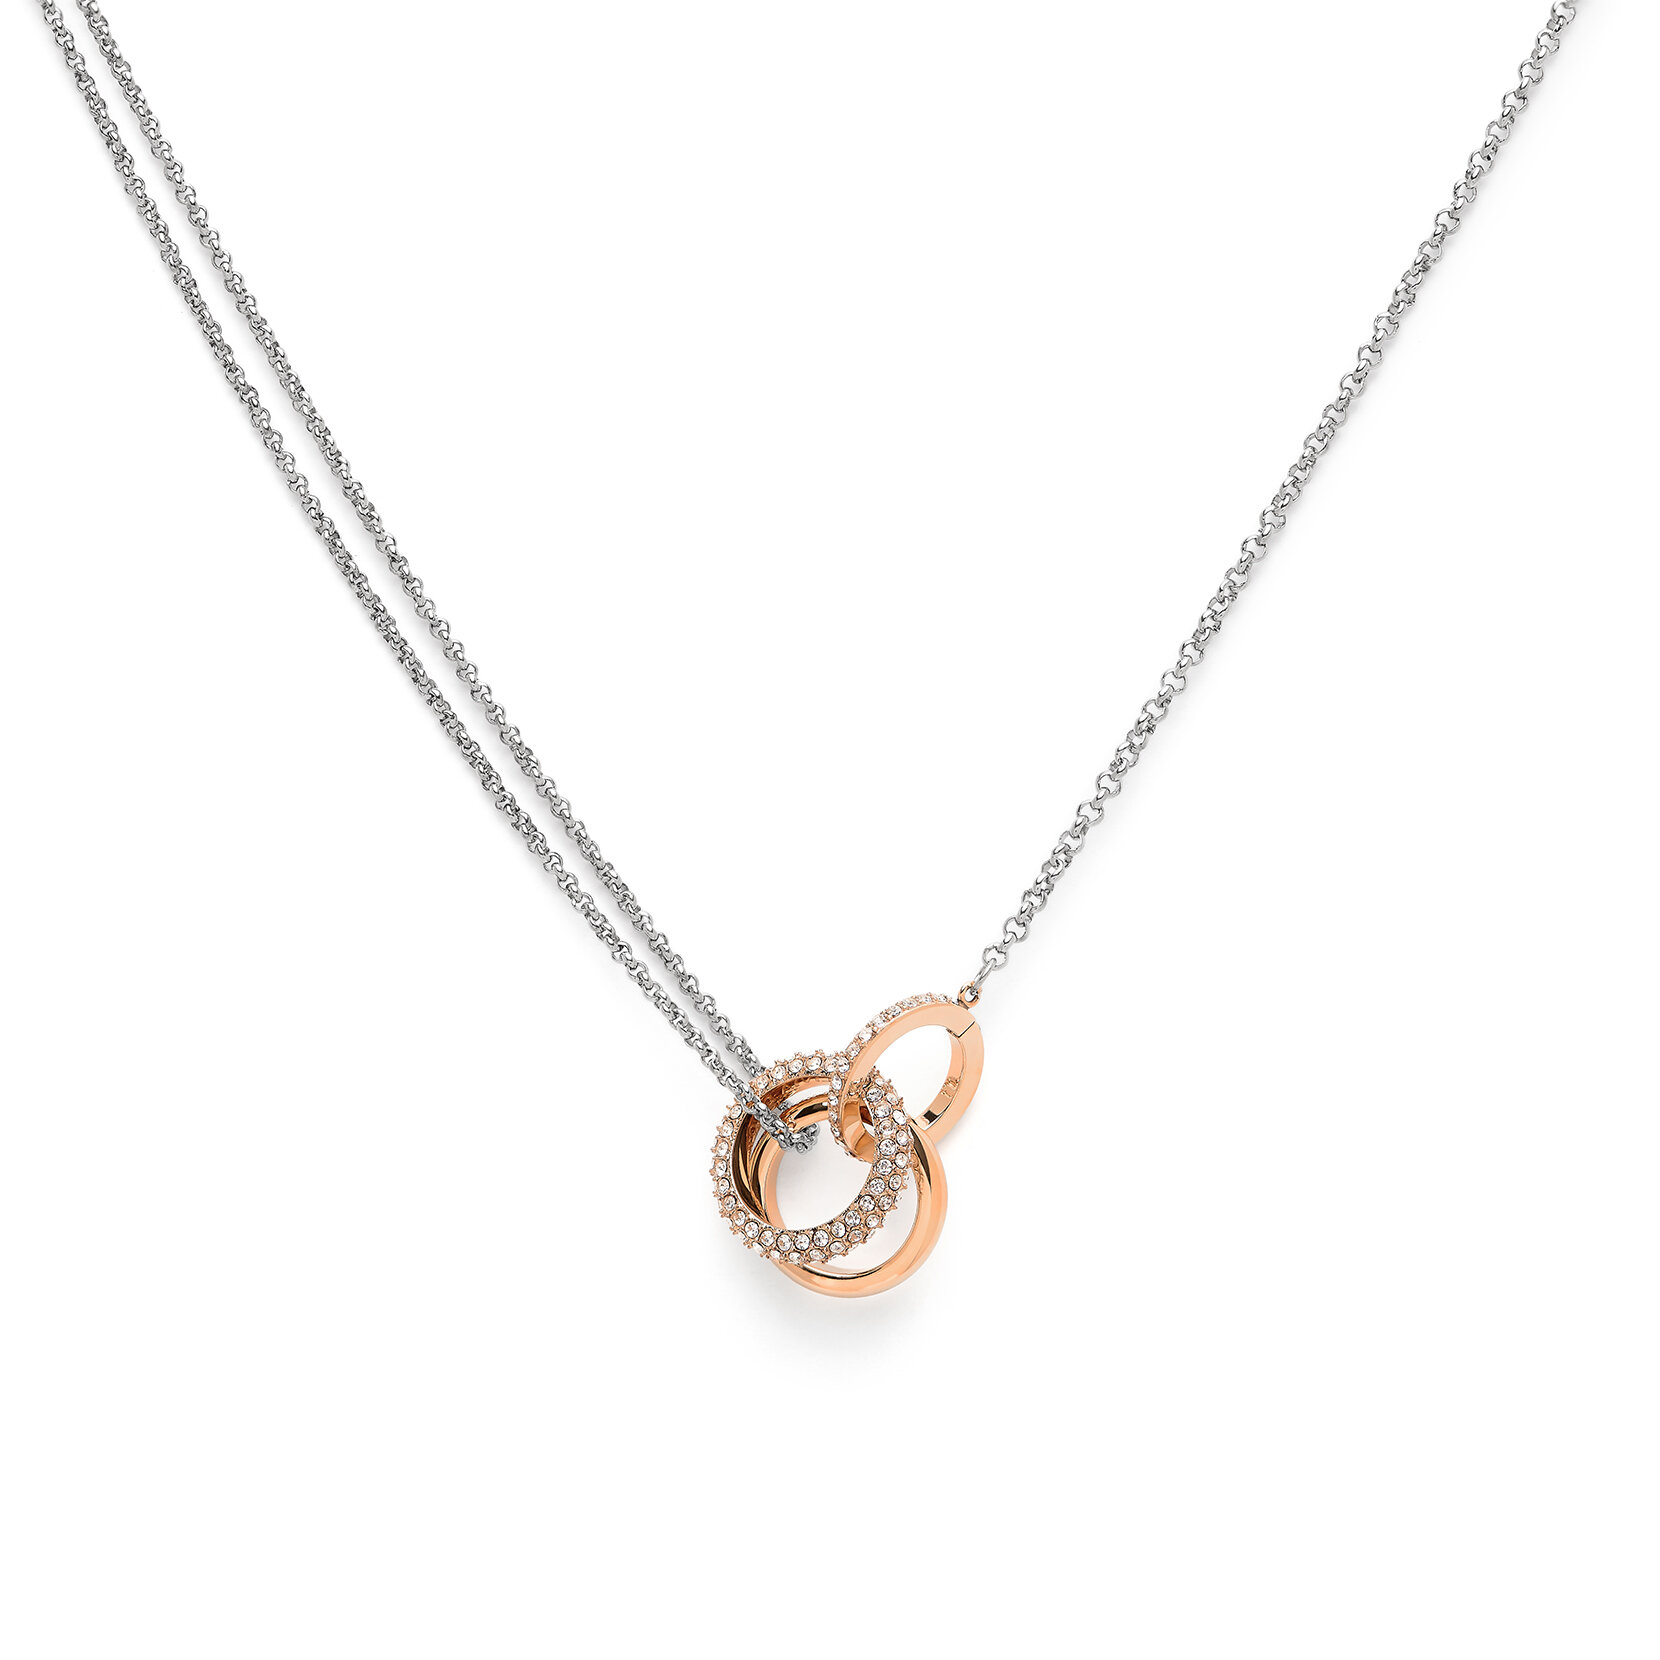 Entwine Silver & Rose Gold Necklace